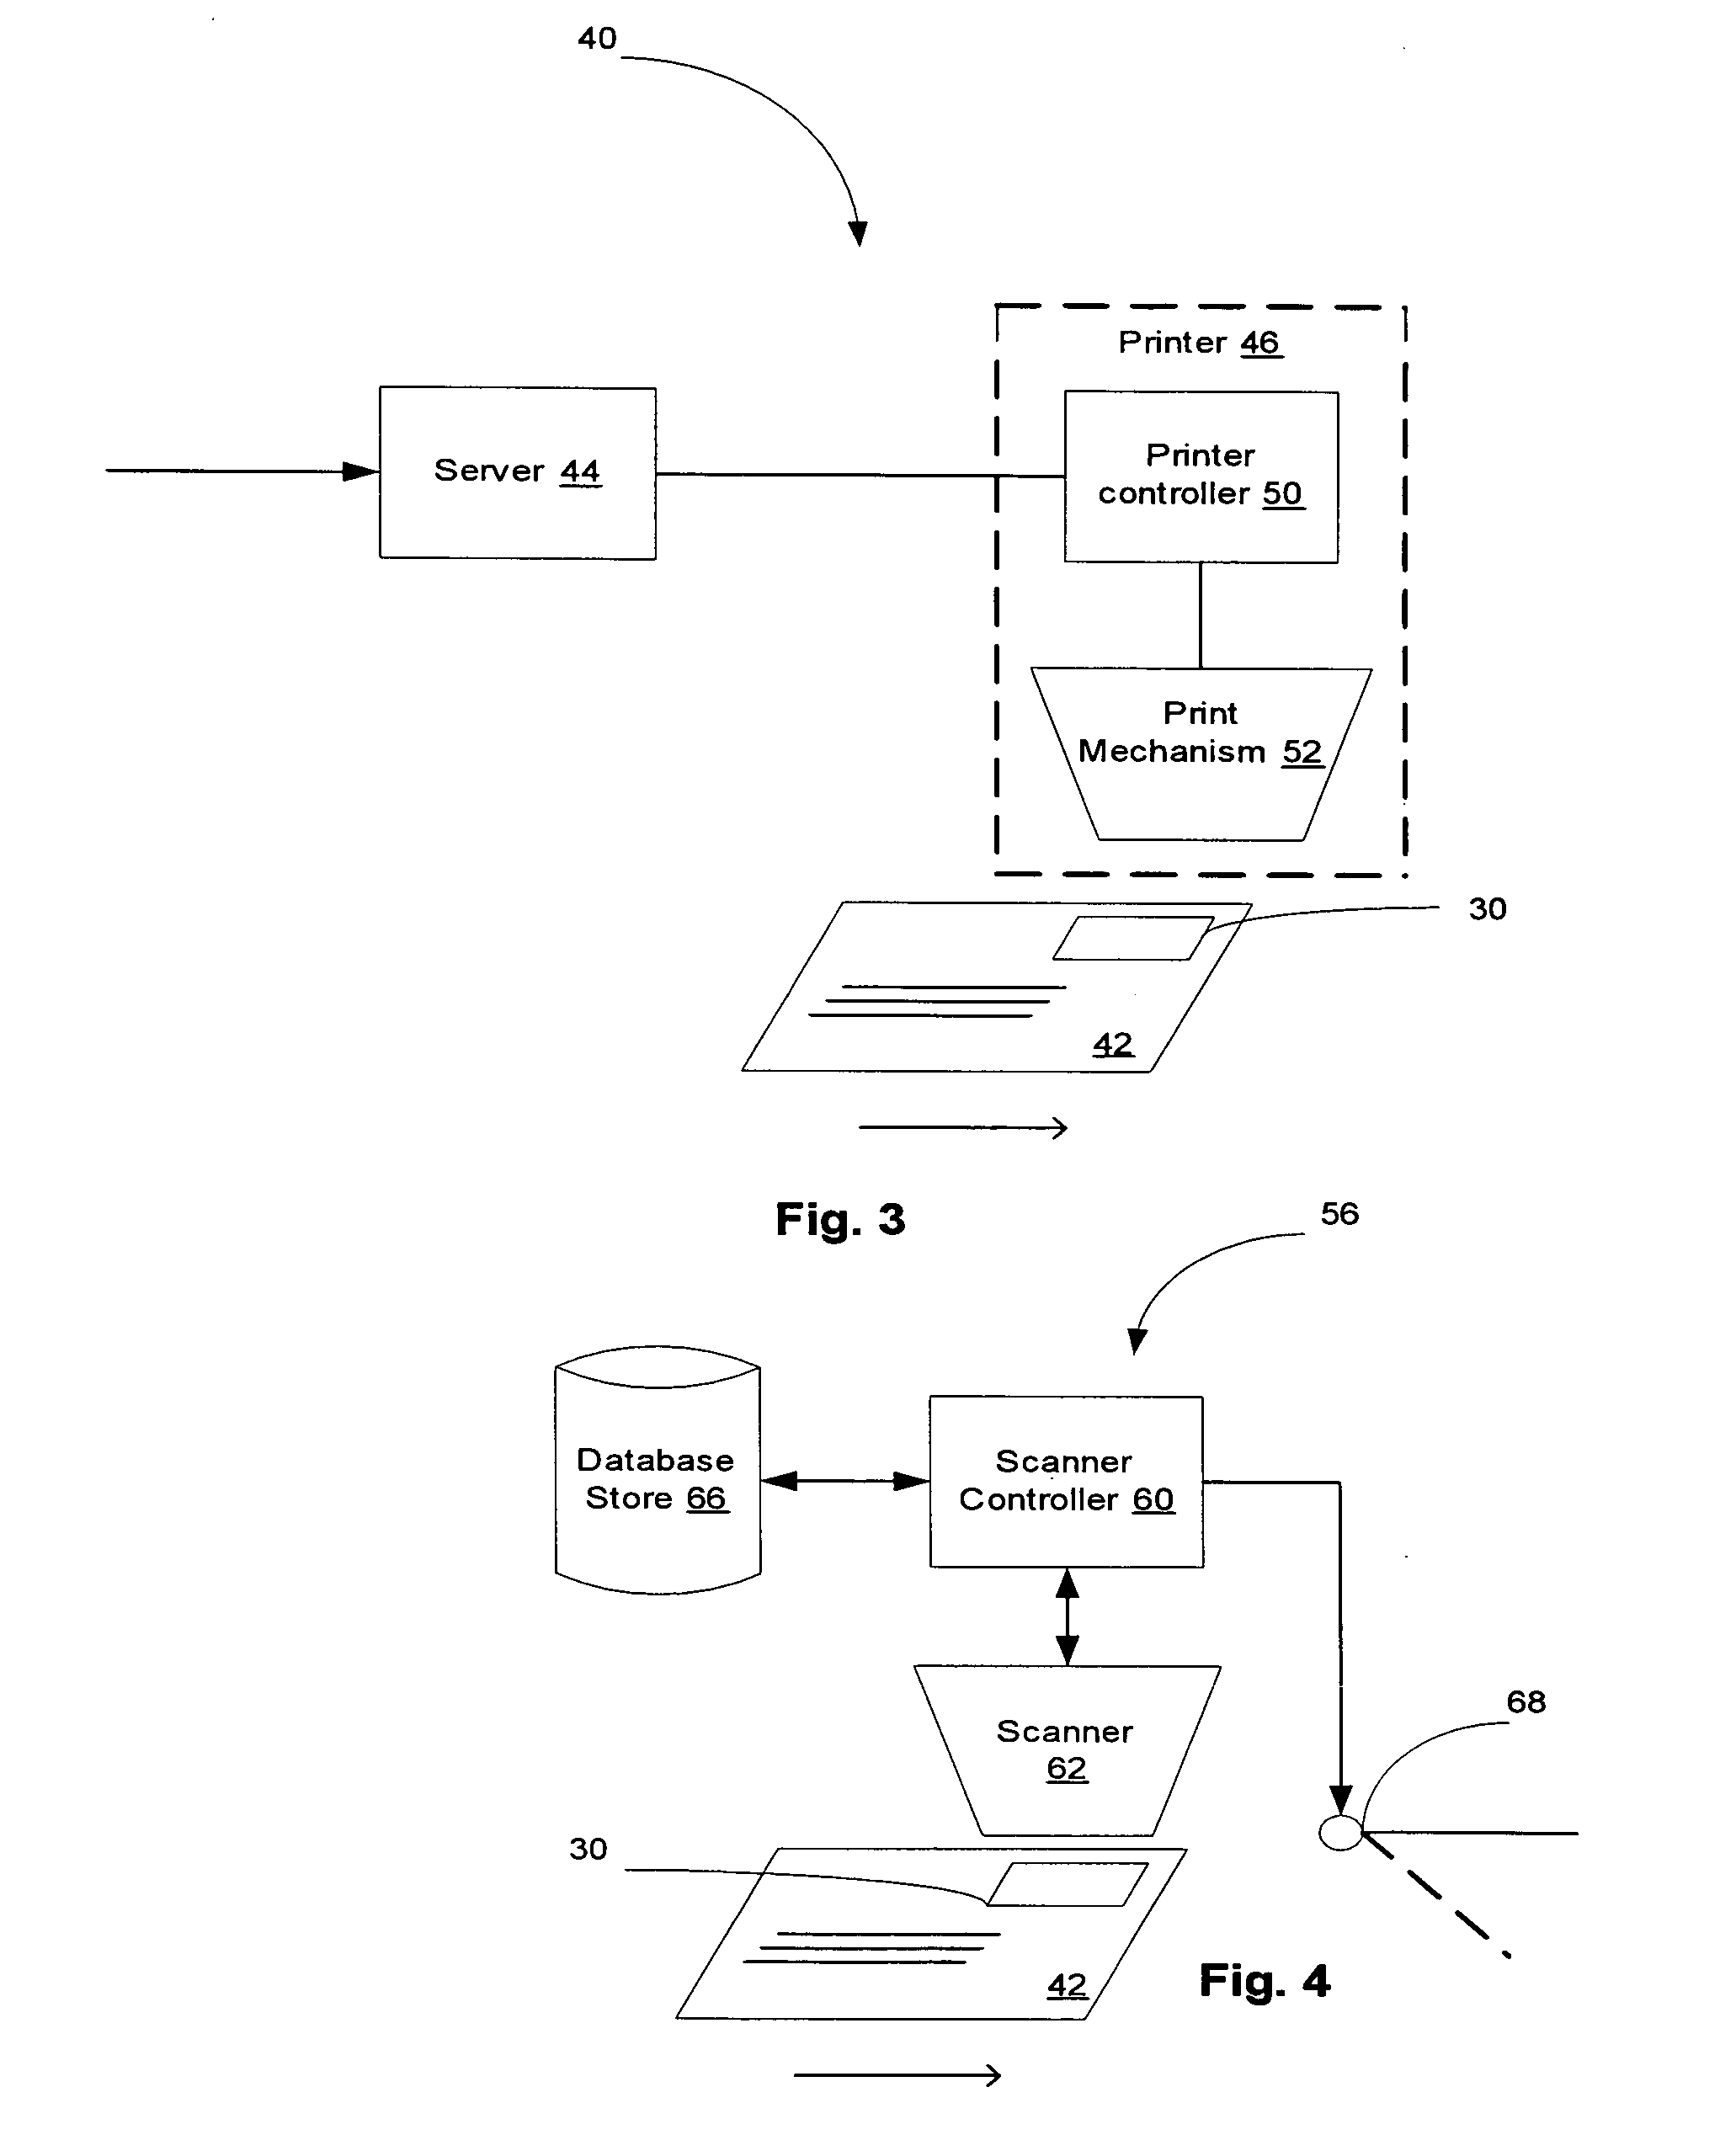 Method and system for printing an original image and for determining if a printed image is an original or has been altered